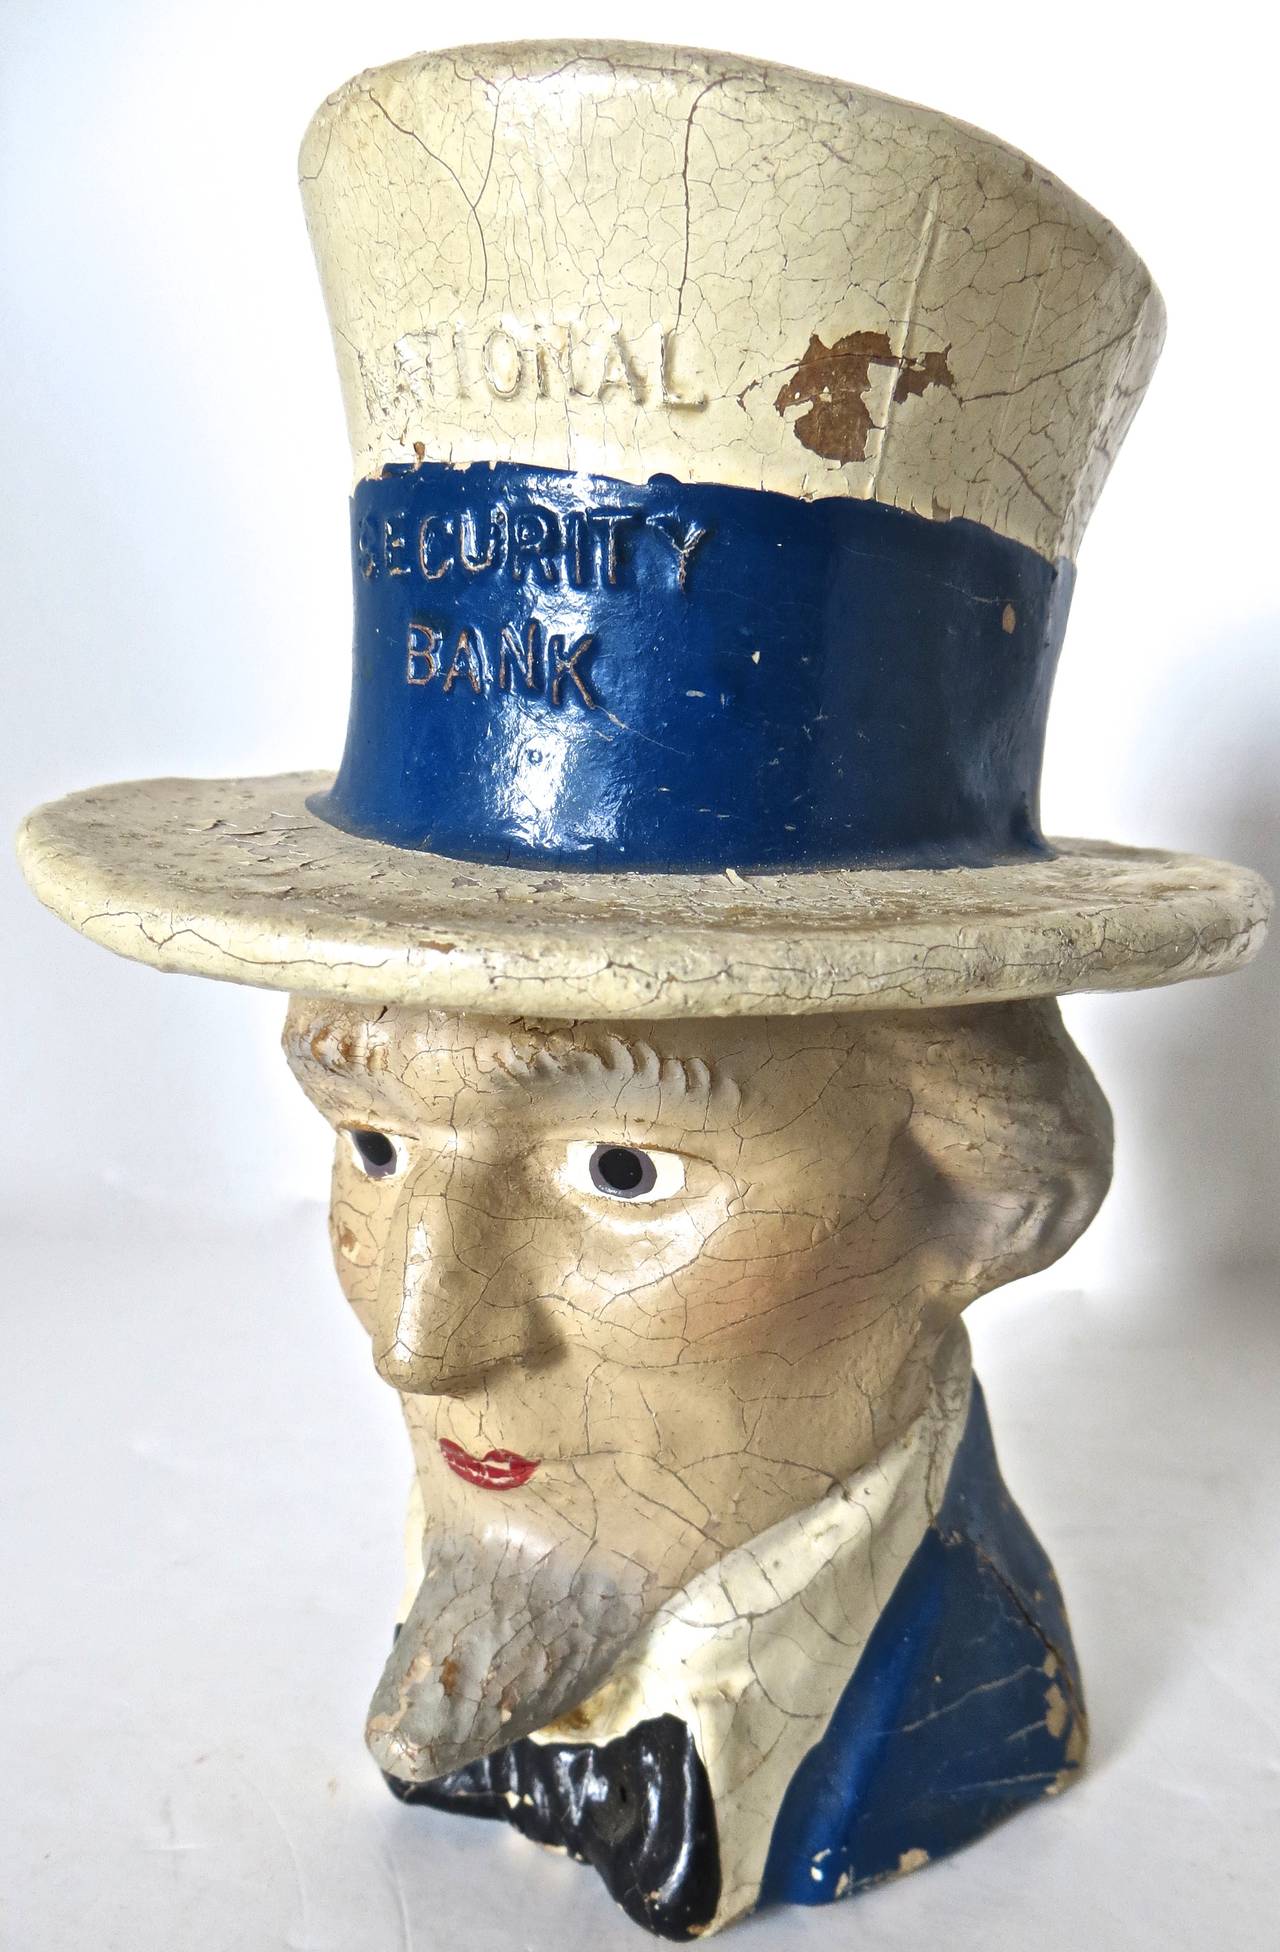 American manufacture; this colorful hand-painted still bank depicting Uncle Sam is all original with no repairs and no repaint. Fabulous crazing throughout indicative of original paint. It is quite difficult to find, especially in all original